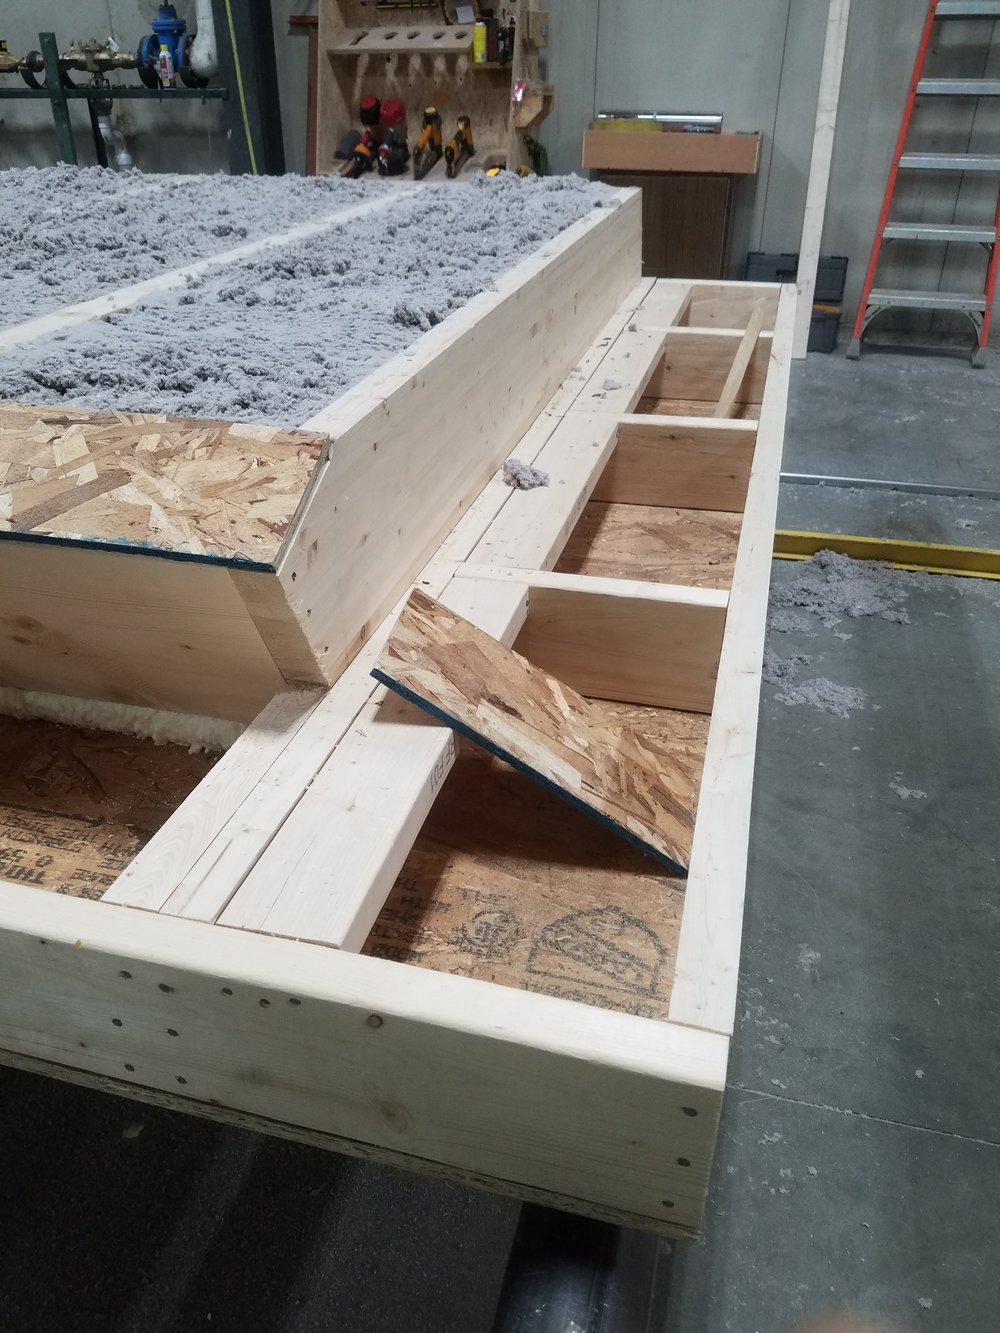 Roof panel with cellulose